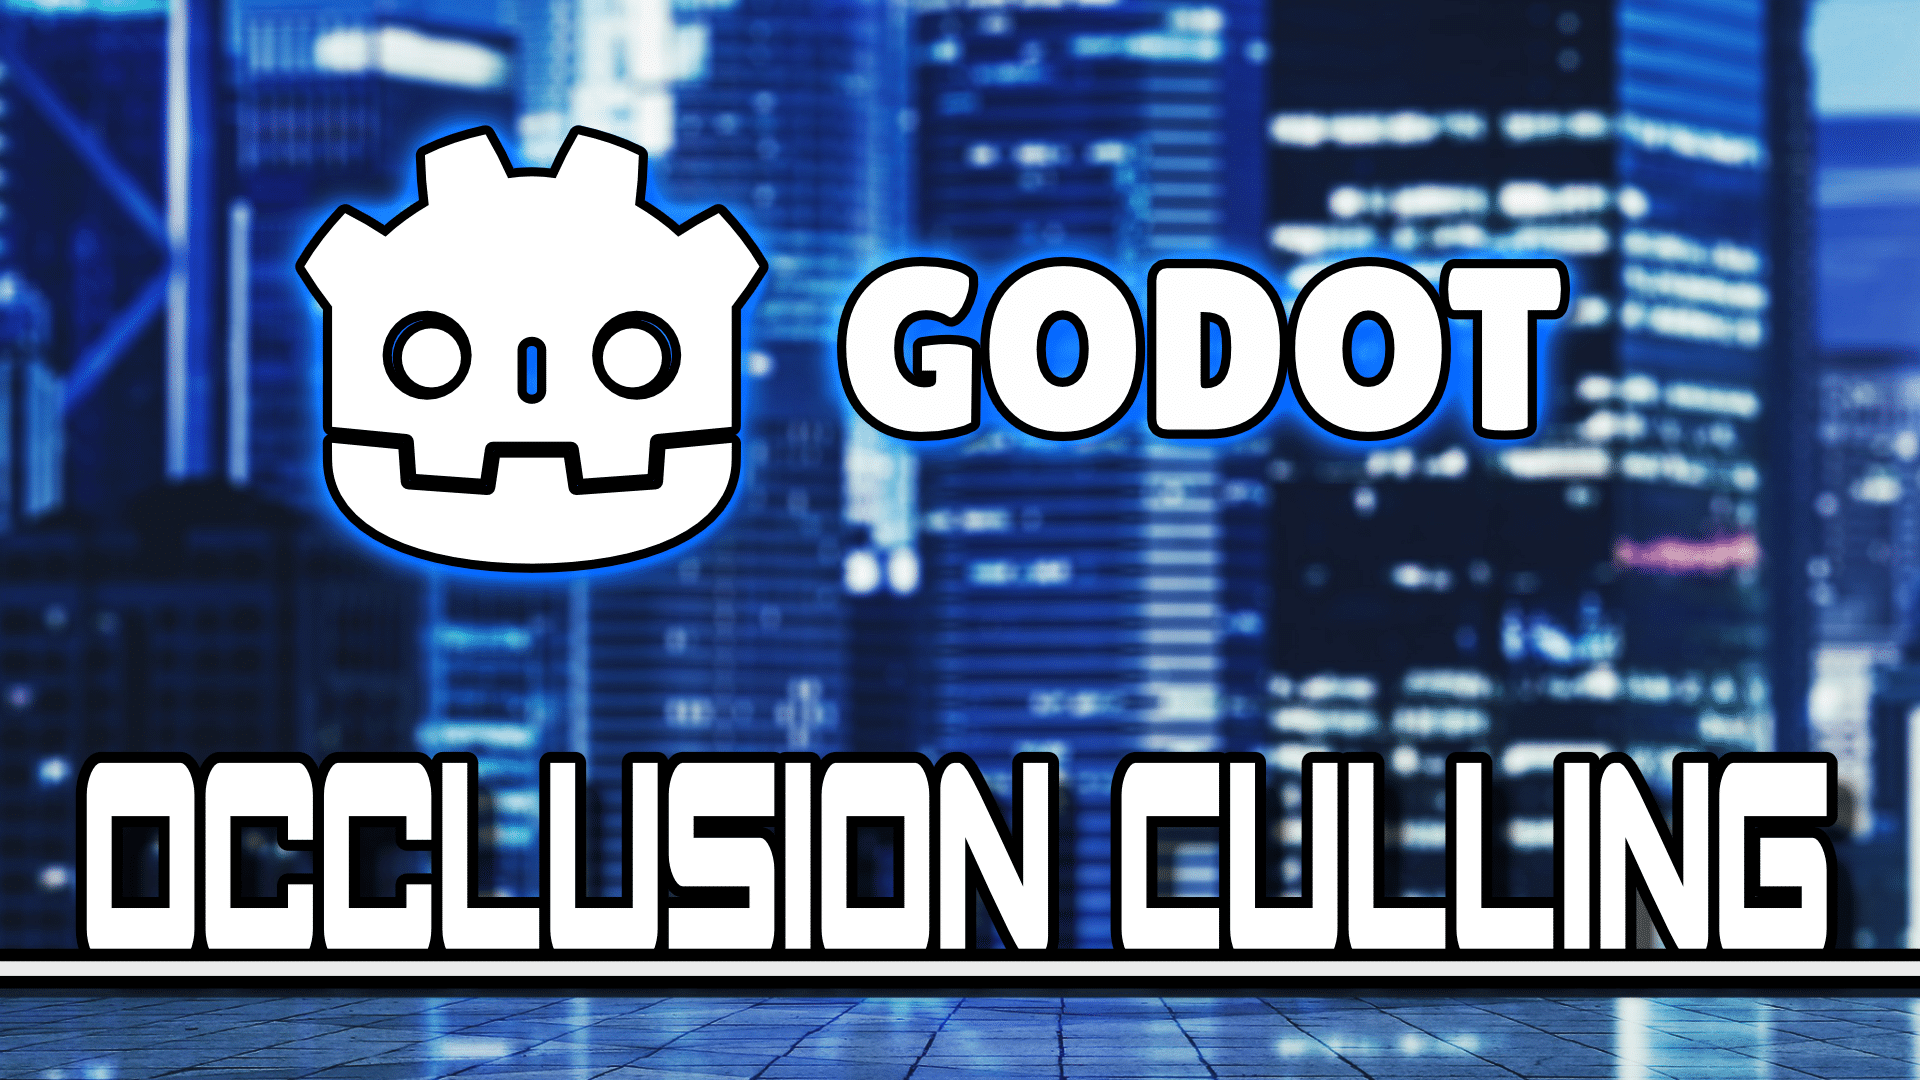 Static-Occlusion-Culling, A great solution for improving culling